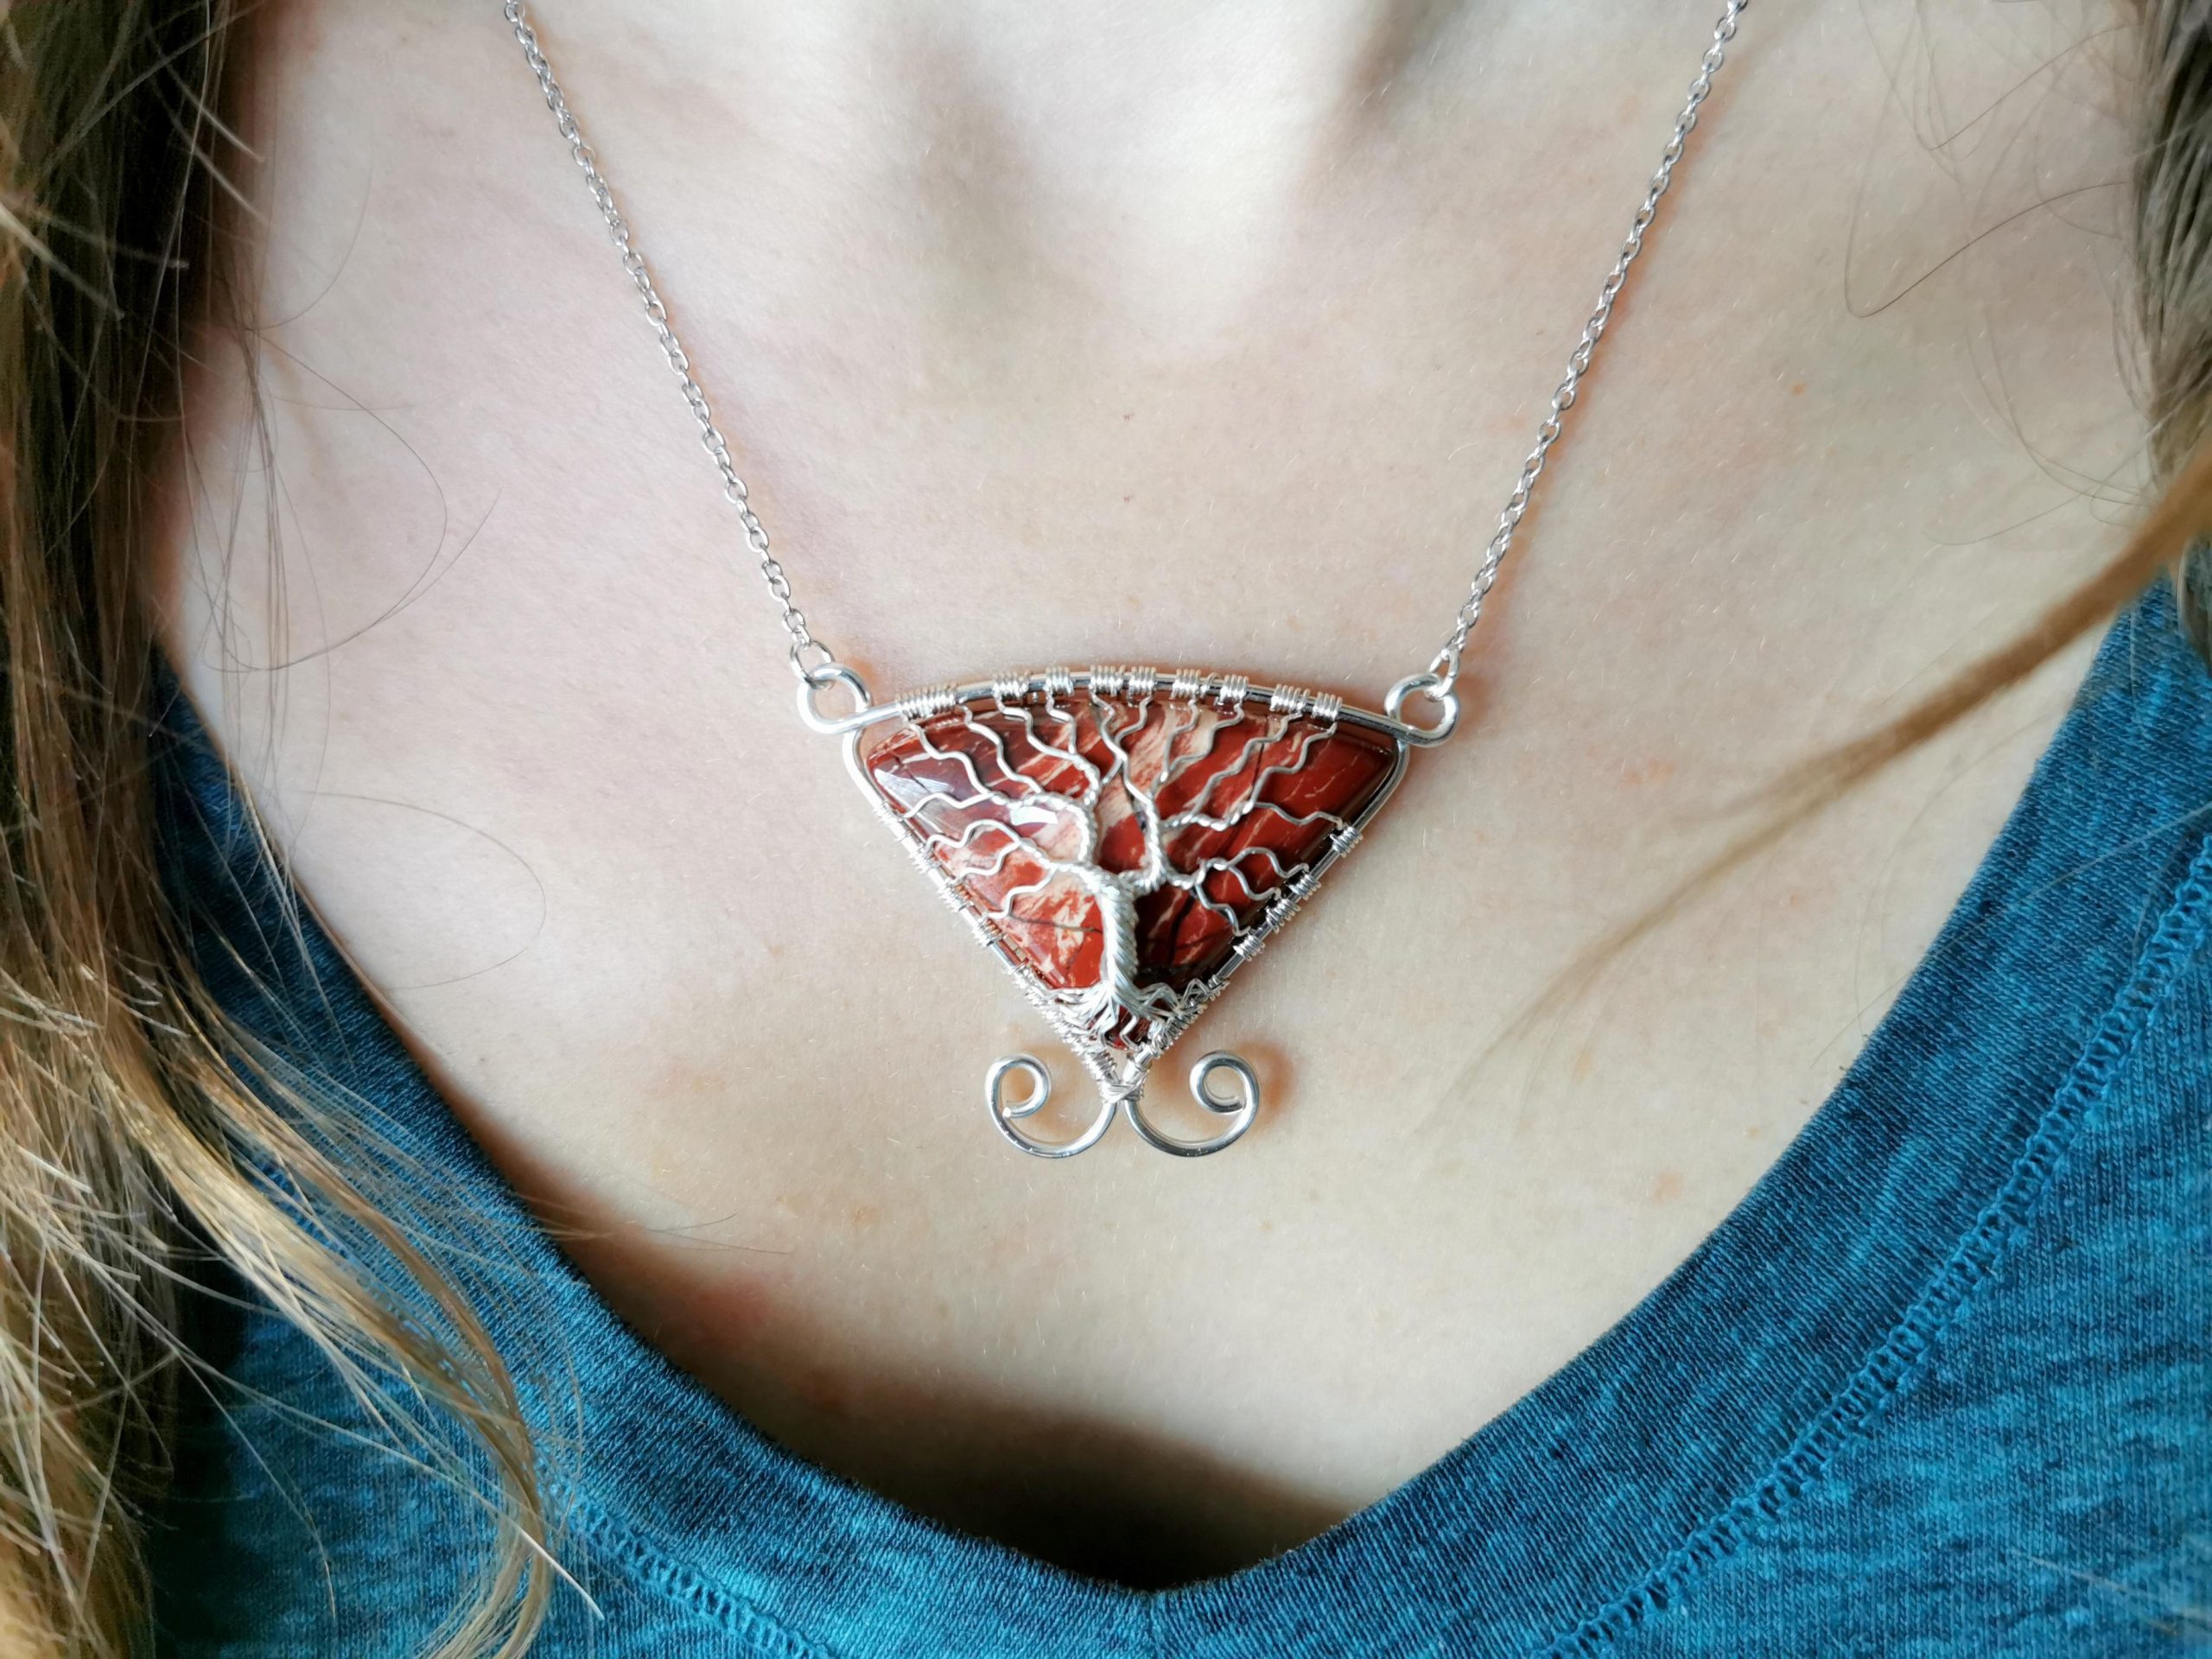 I made a tree necklace with a mookaite gemstone.